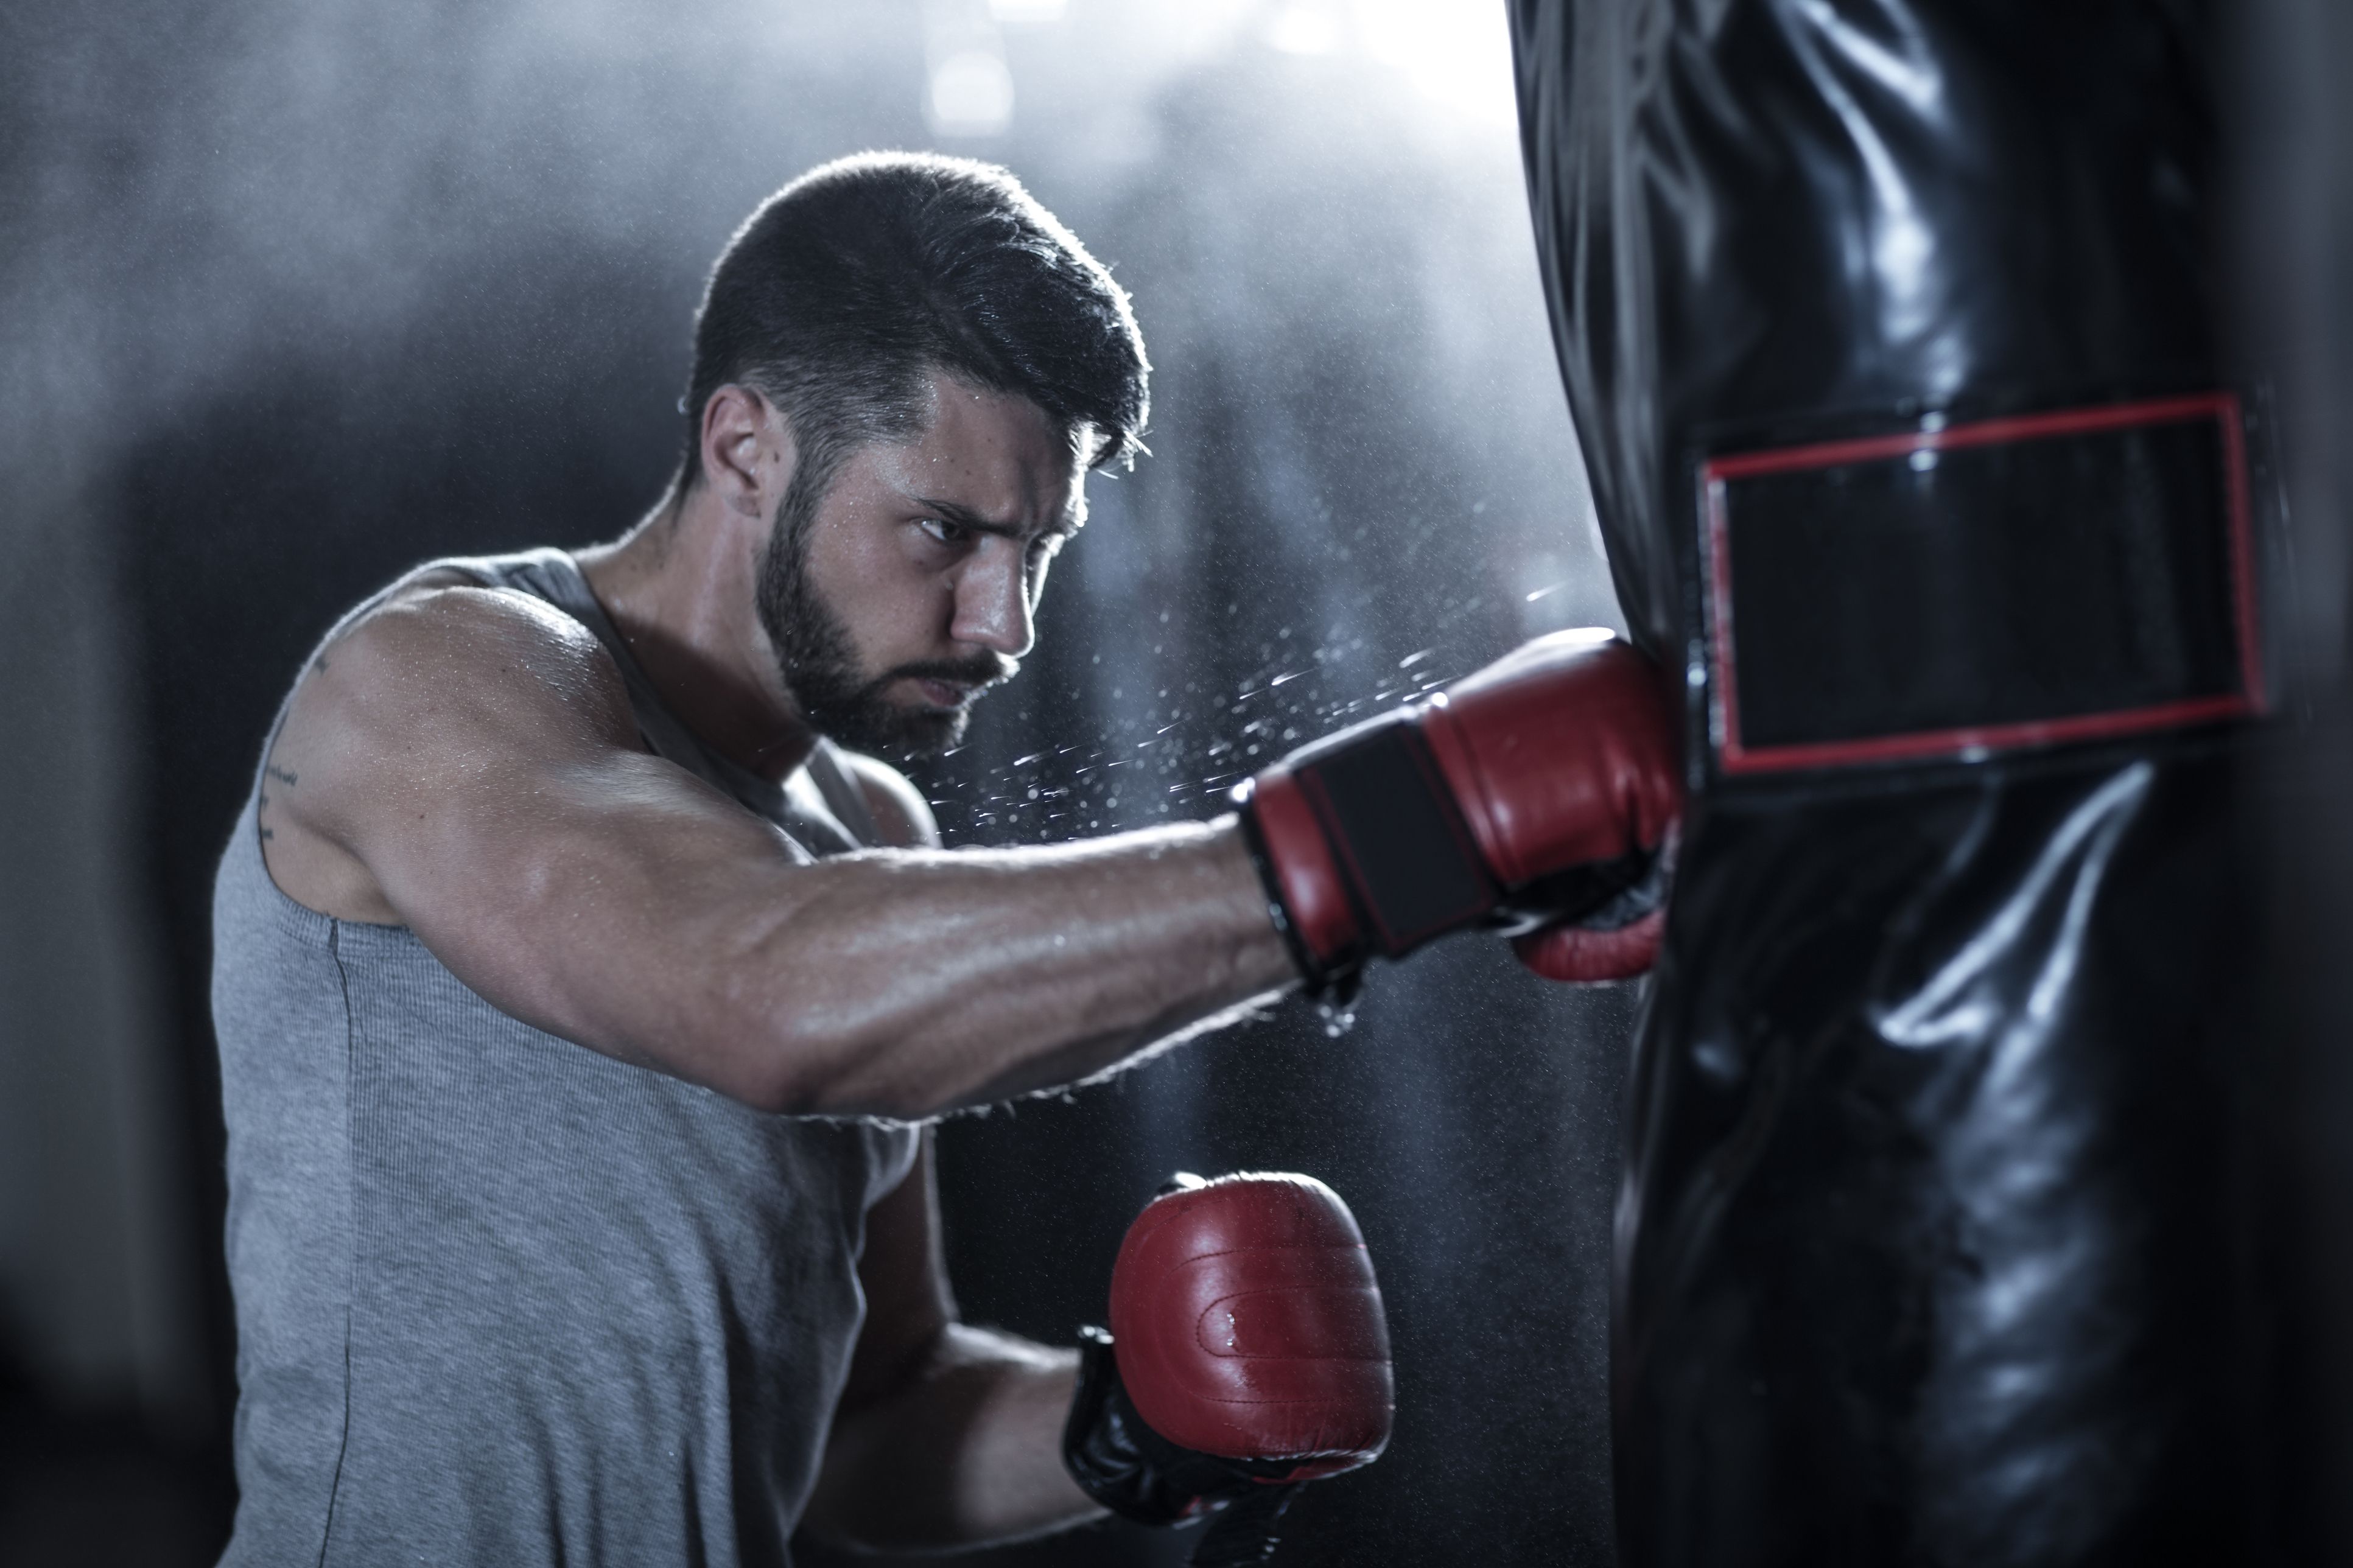 6 Best Boxing Workouts - Cardio Boxing Exercises to Lose Weight